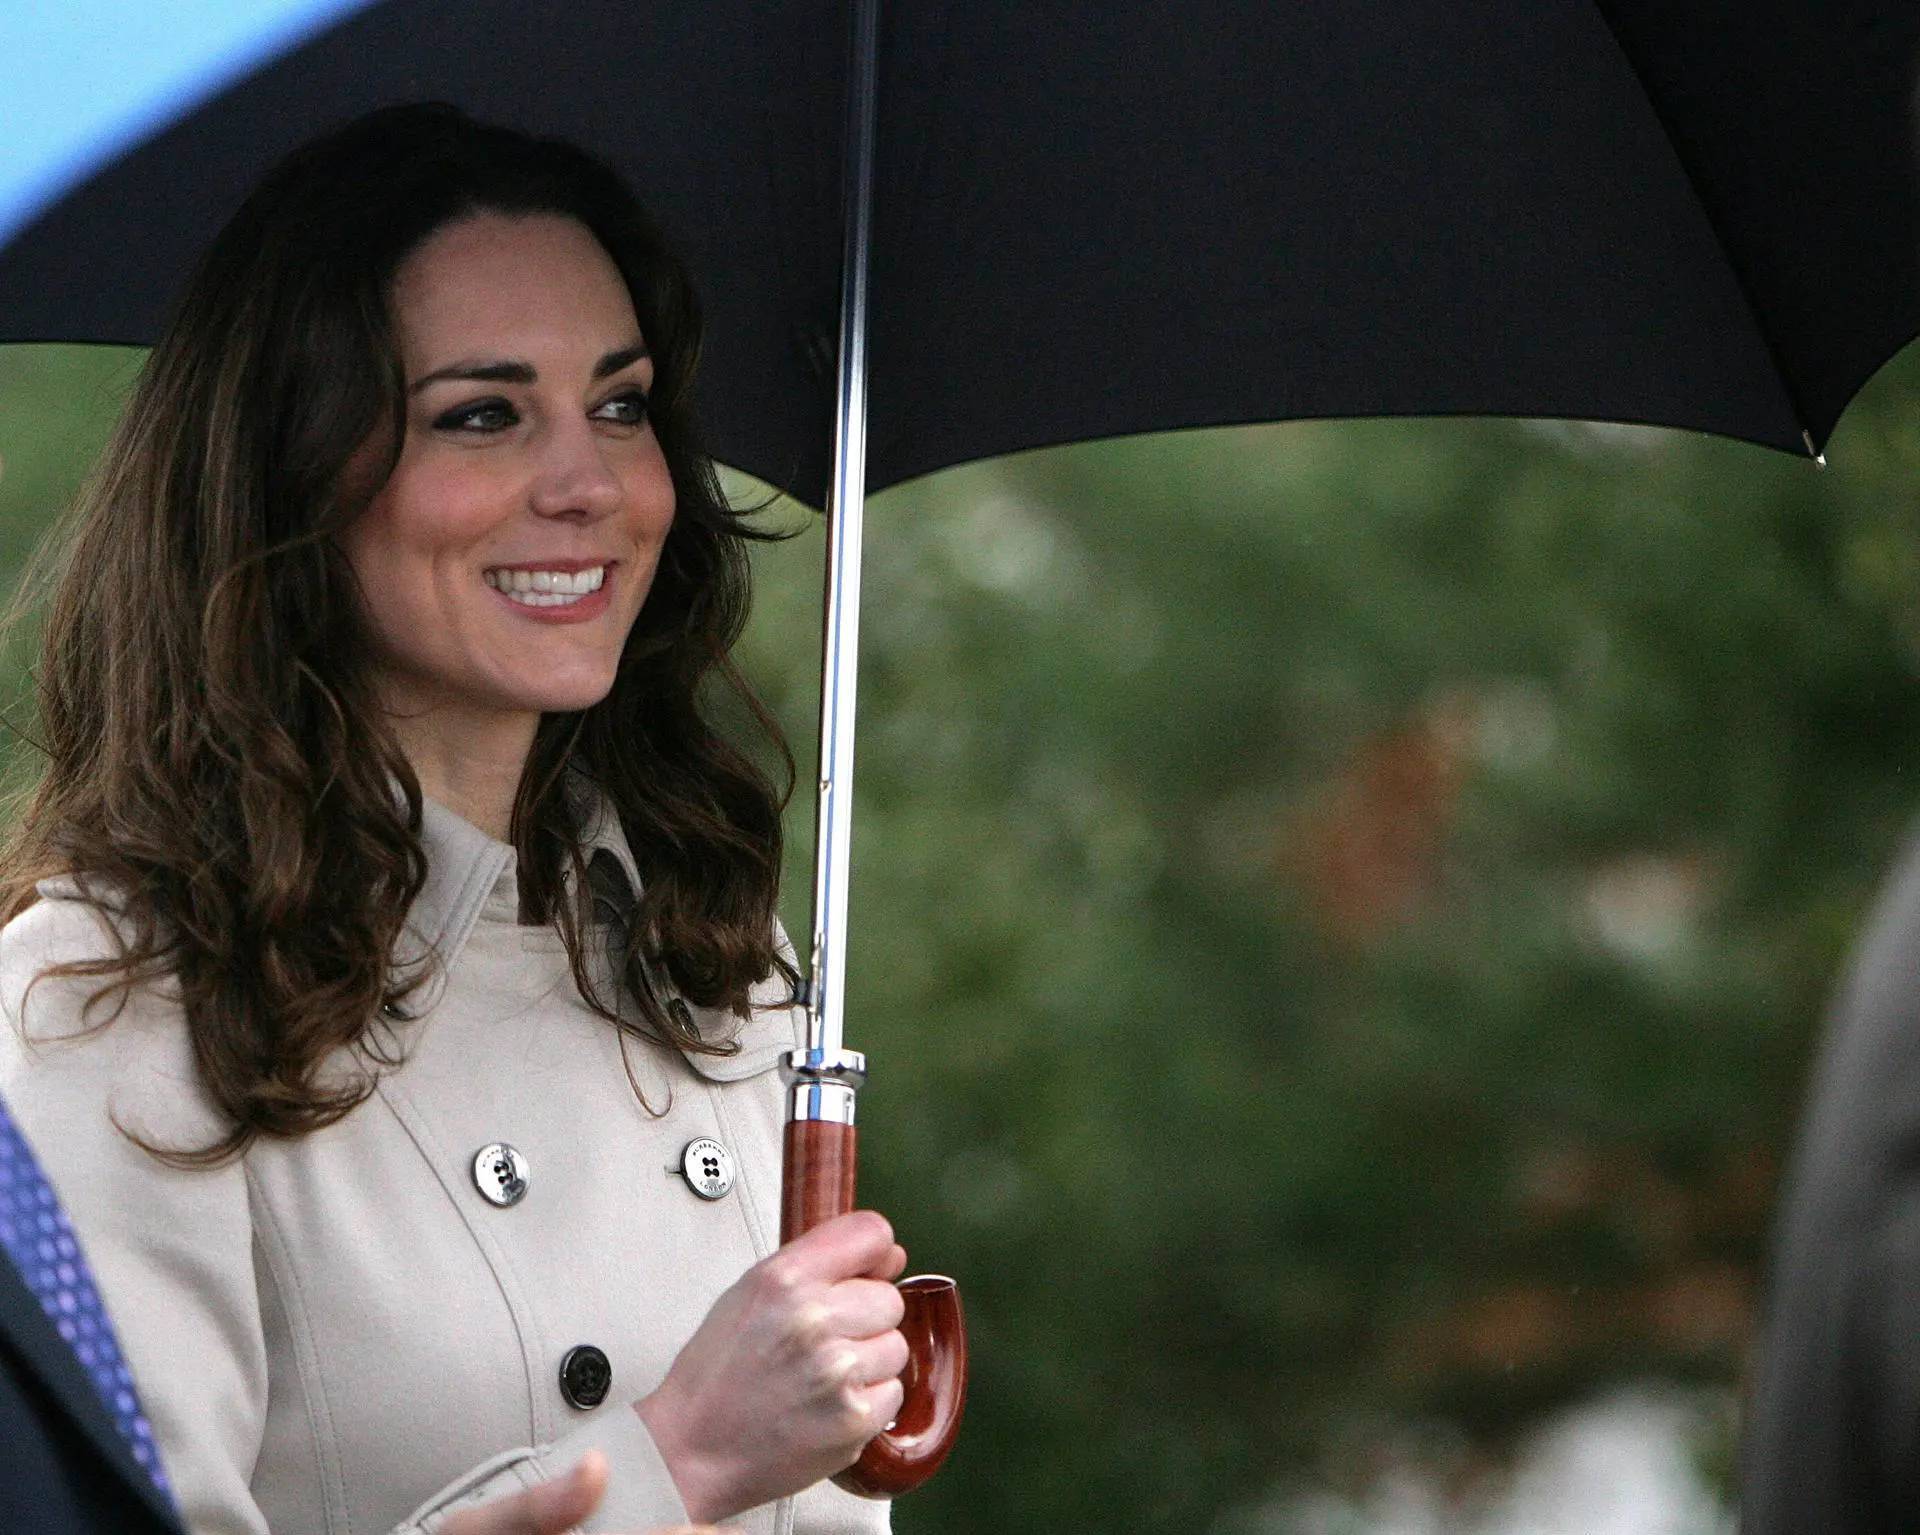 Clinic at center of Kate Middleton data scandal could be fined 19m dollars